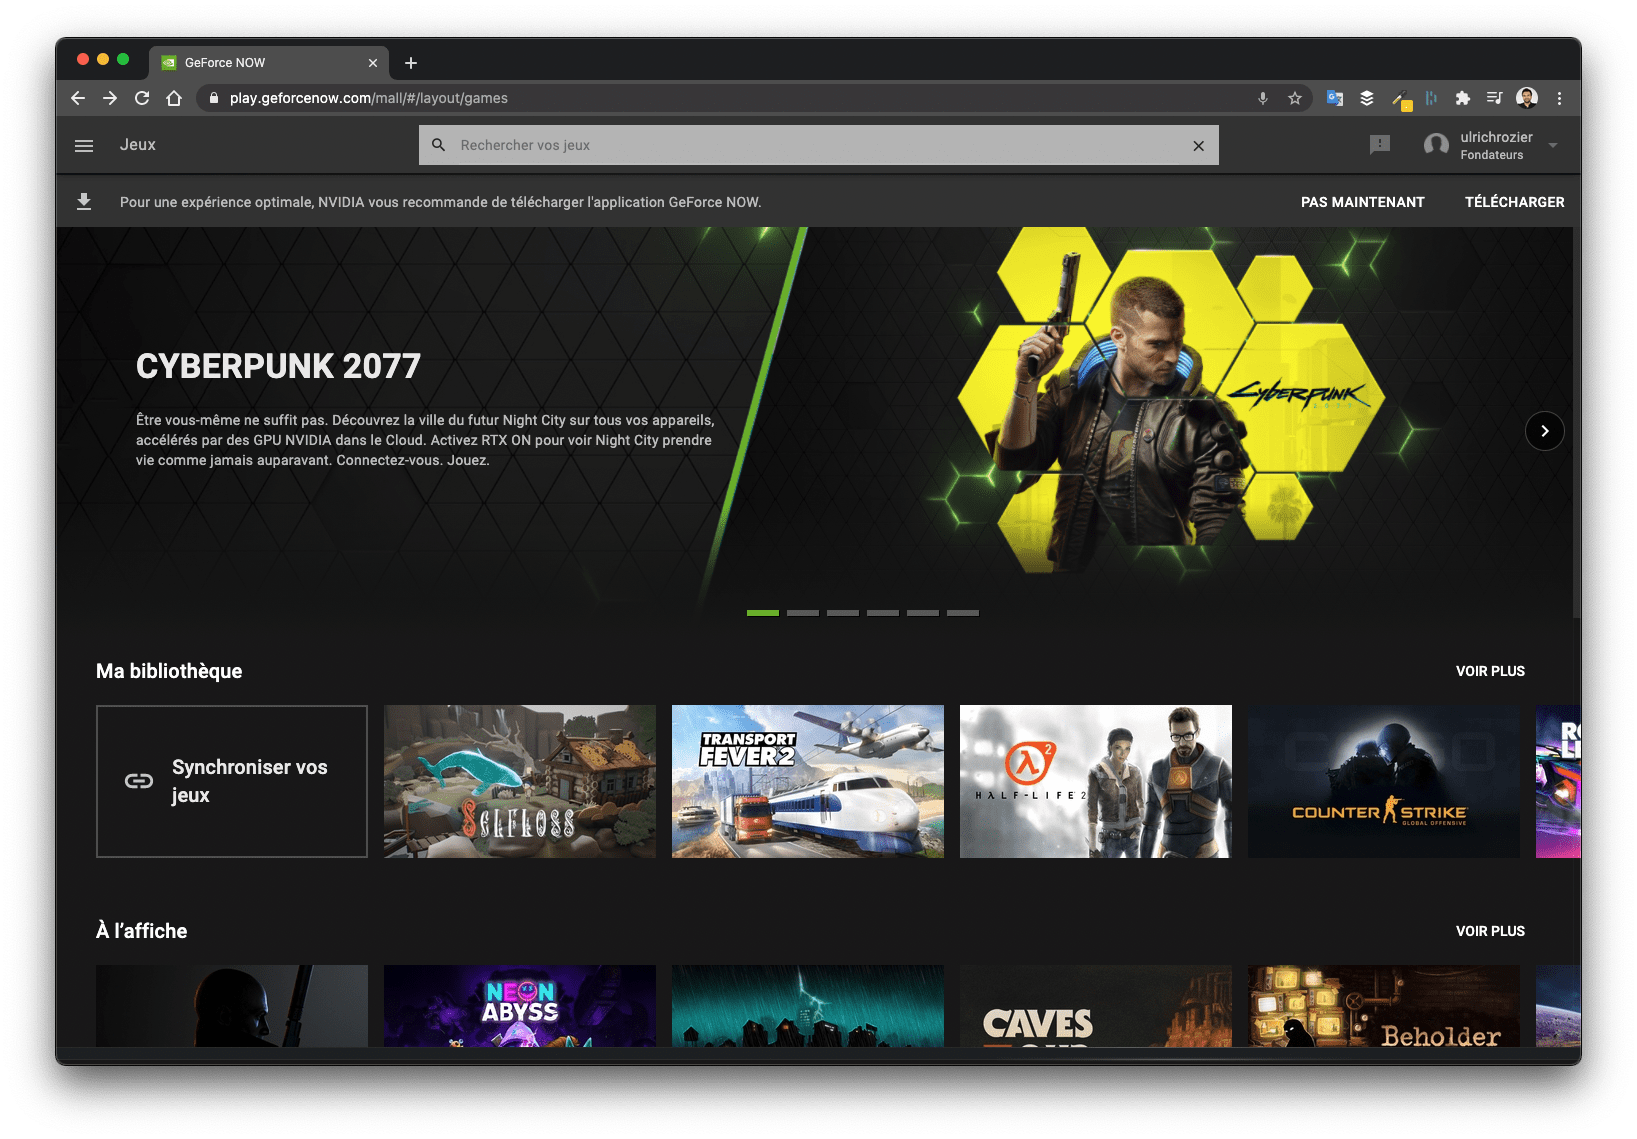 nvidia geforce now download apk new version